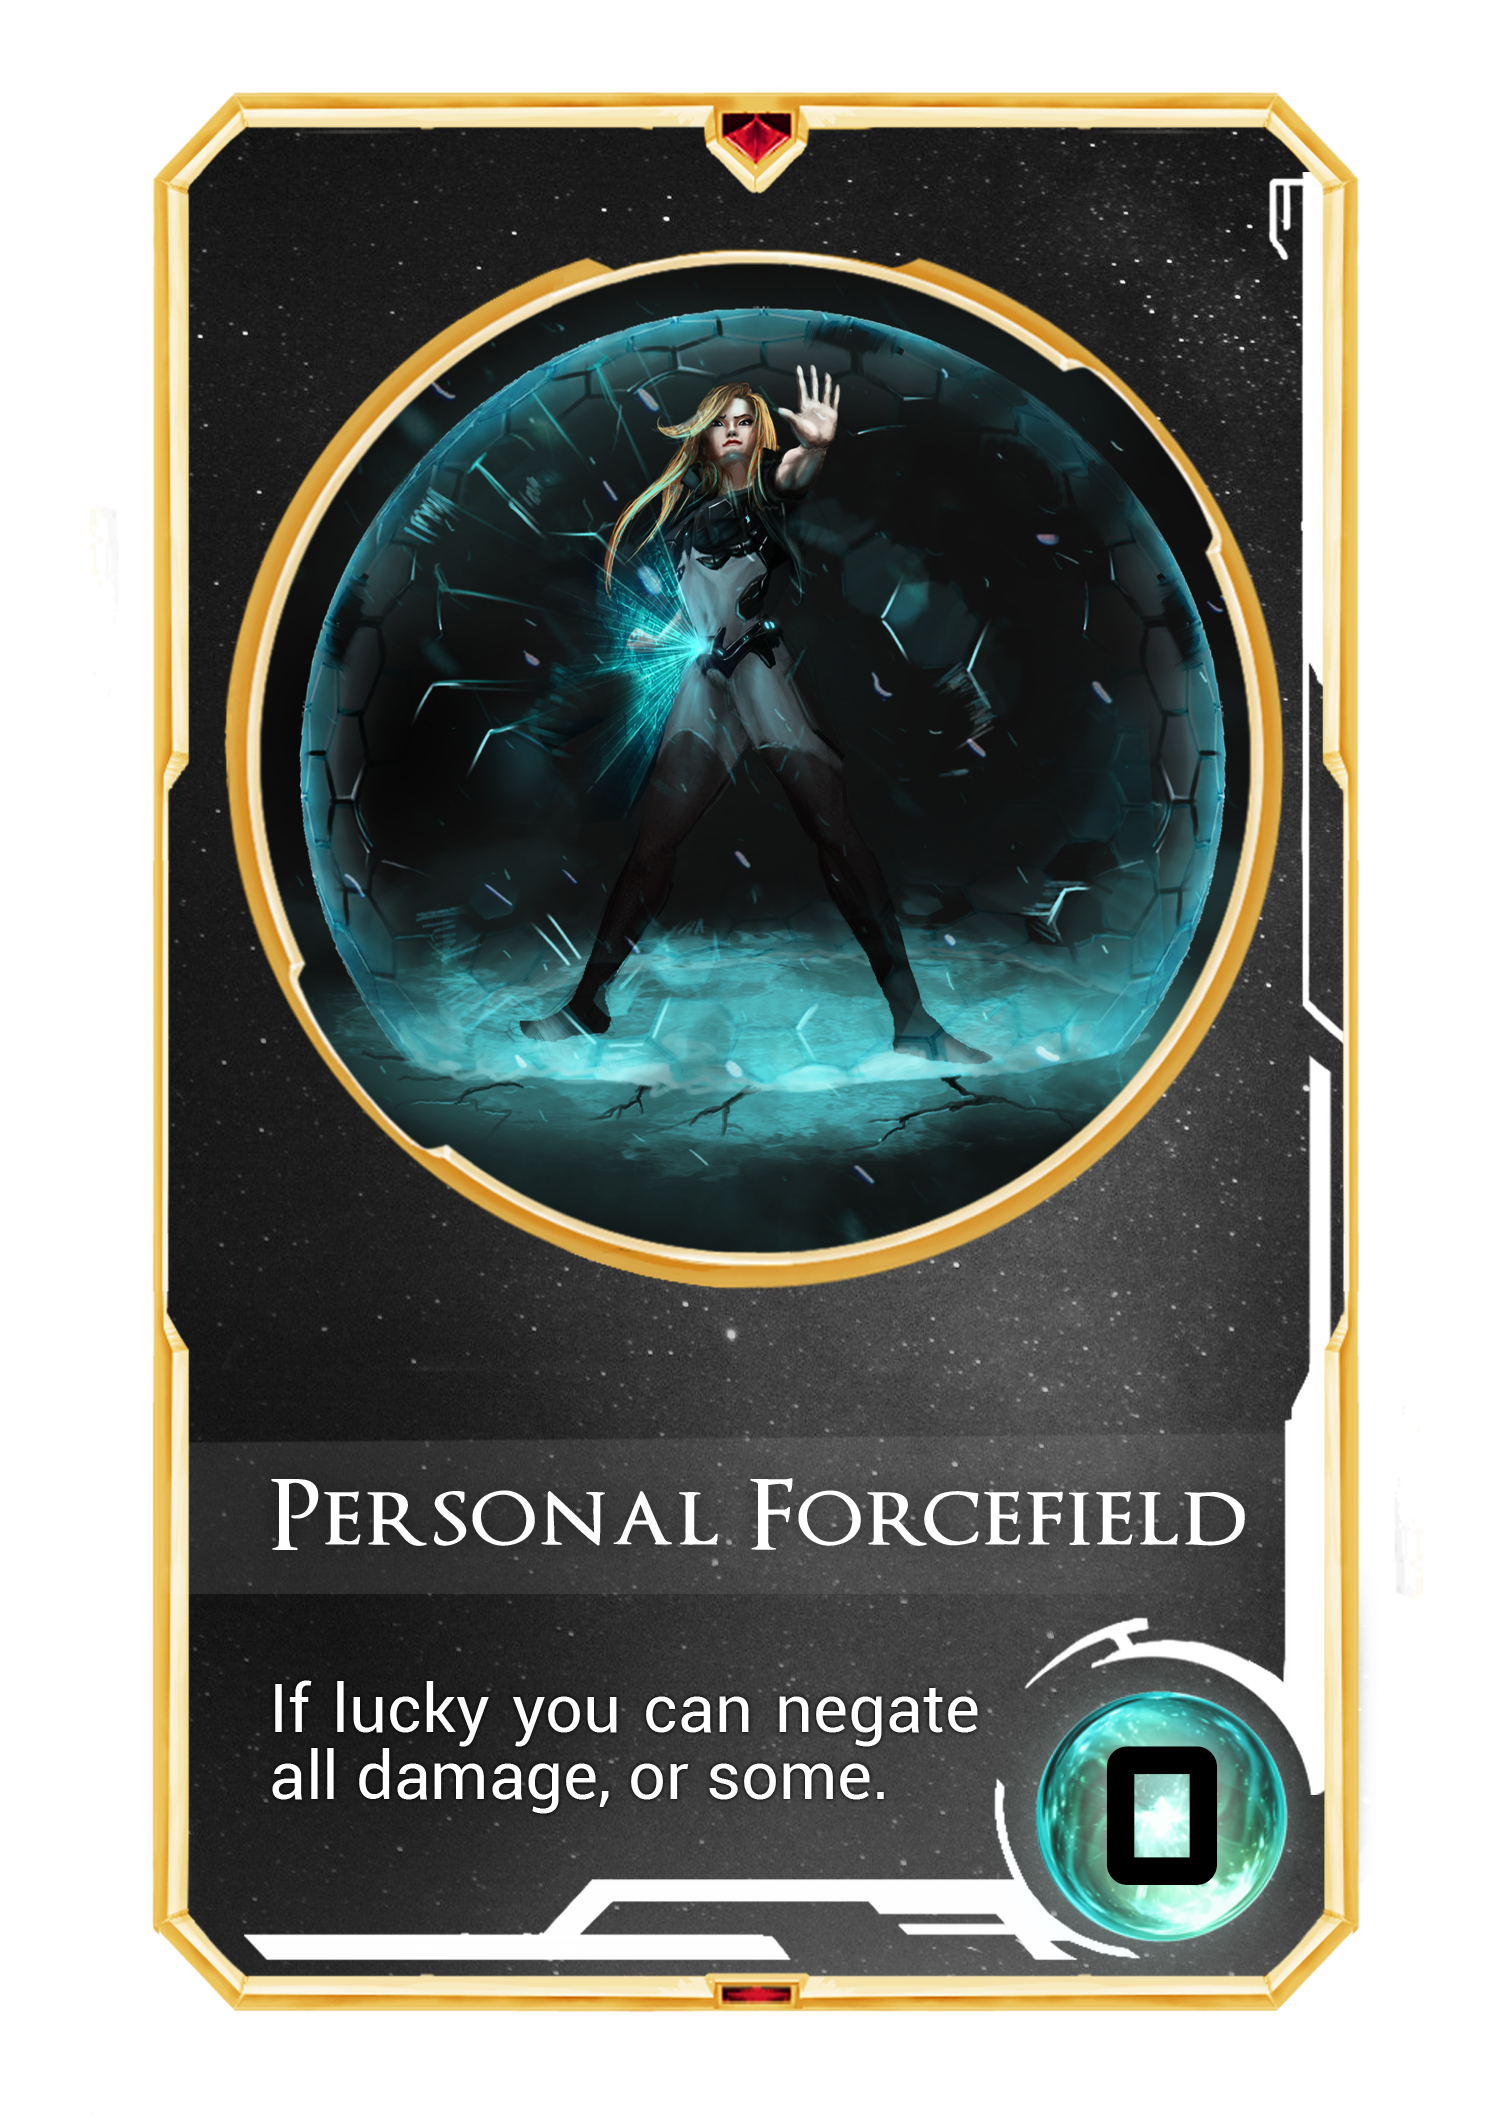 Personal Forcefield